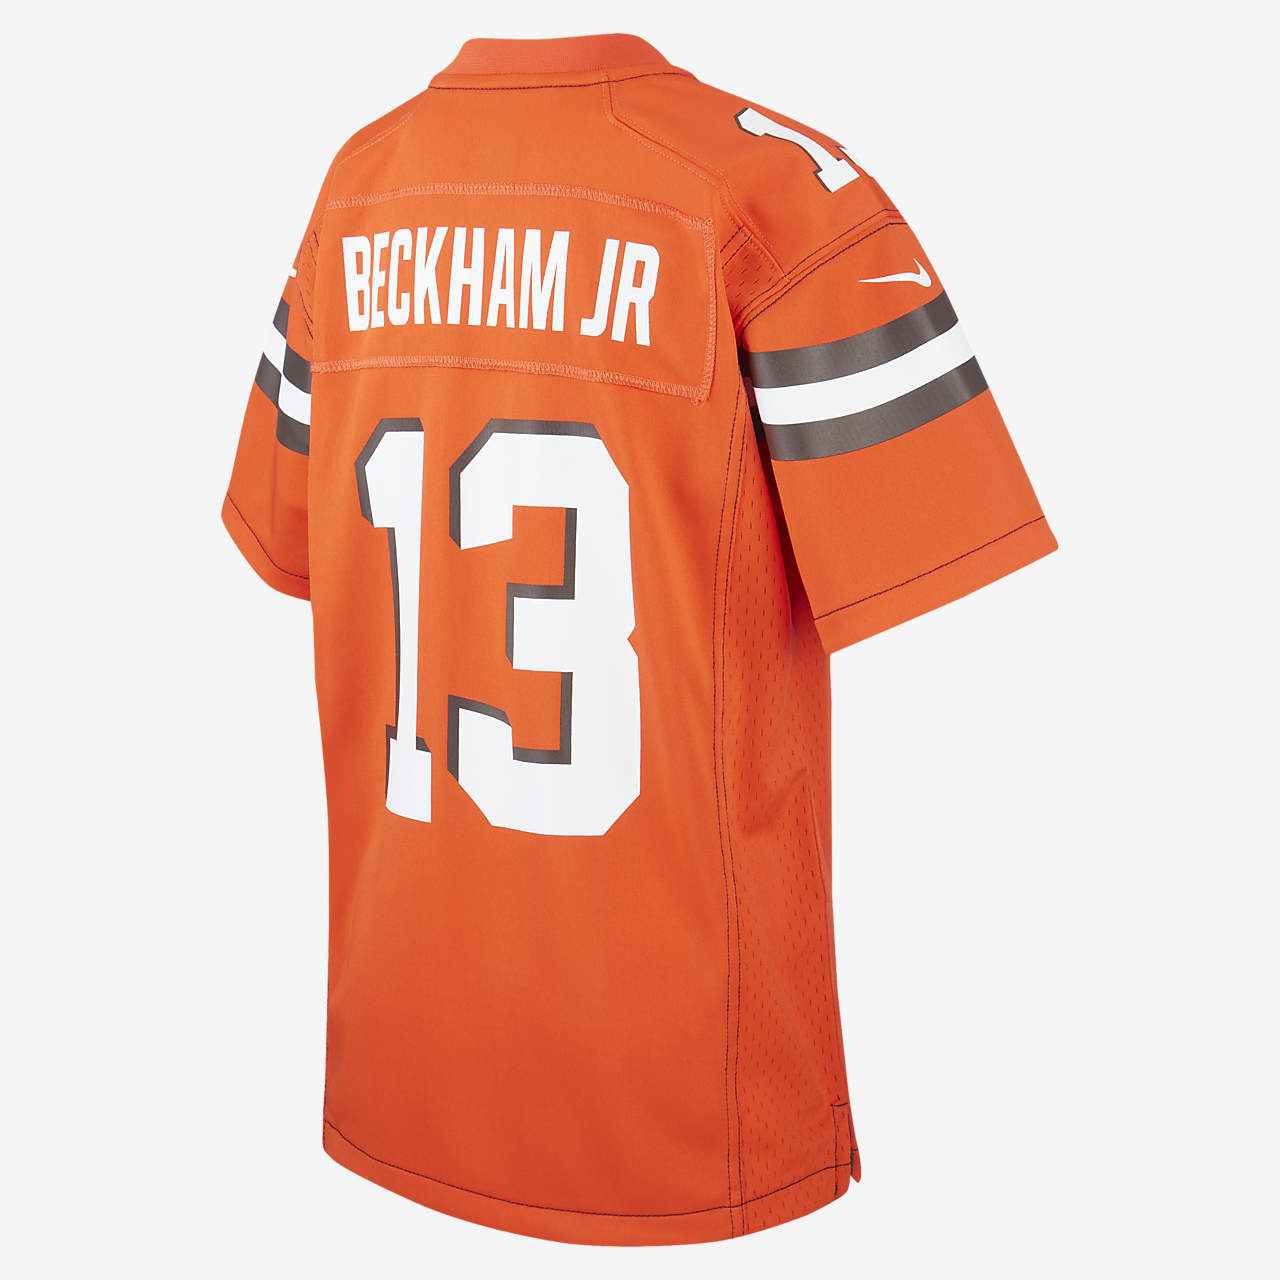 cleveland browns odell jersey